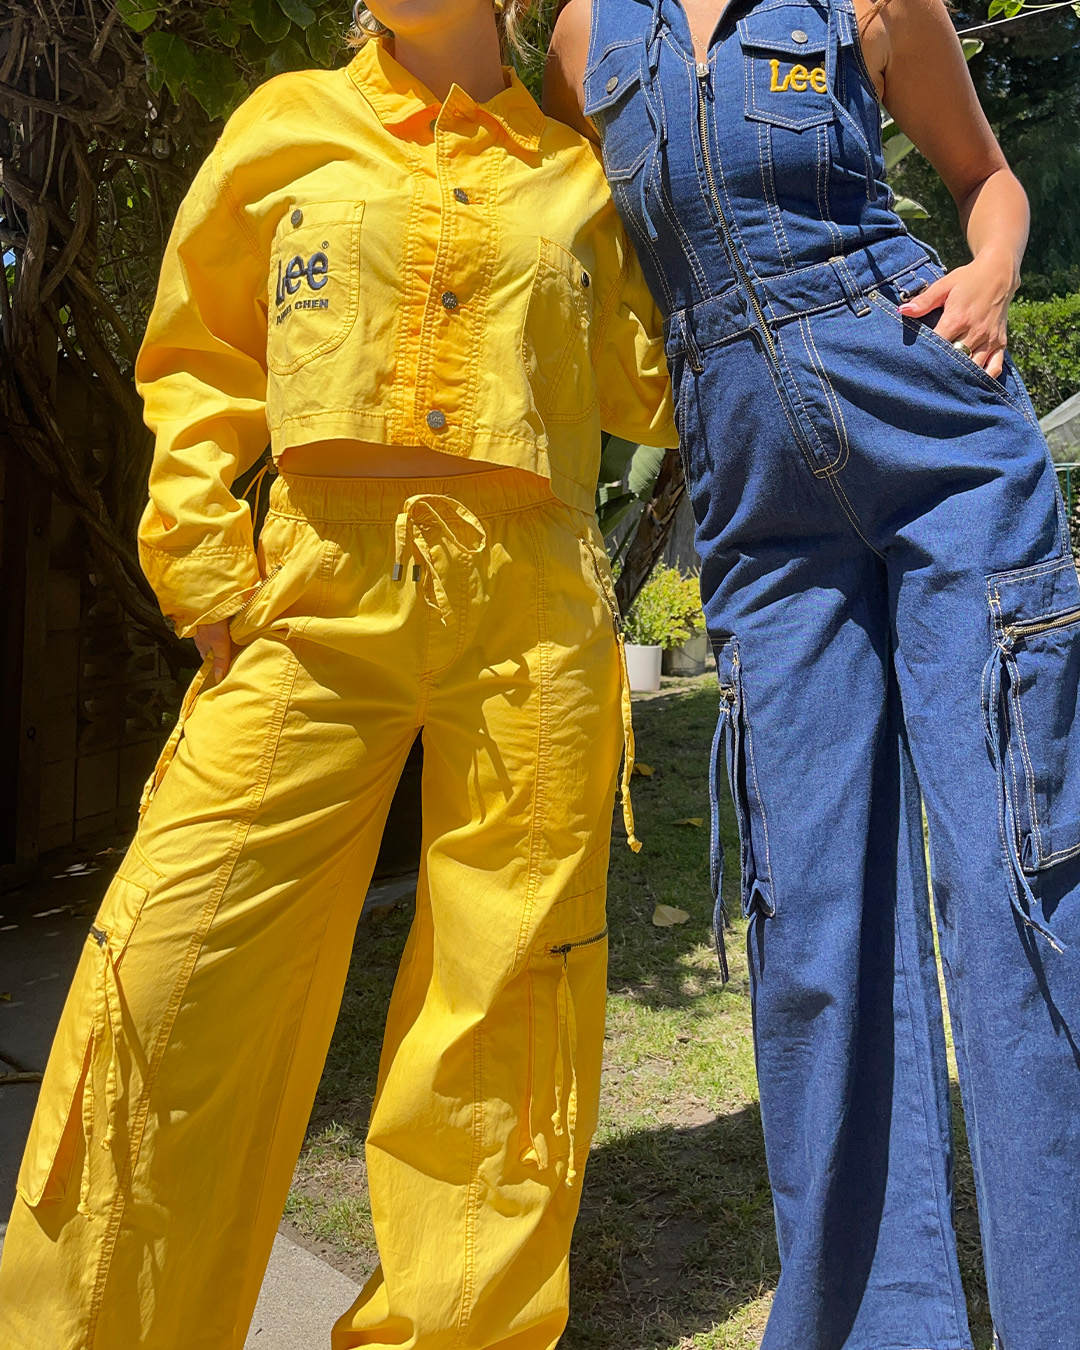 Pic of women wearing a Lee jeans denim one piece and yellow set